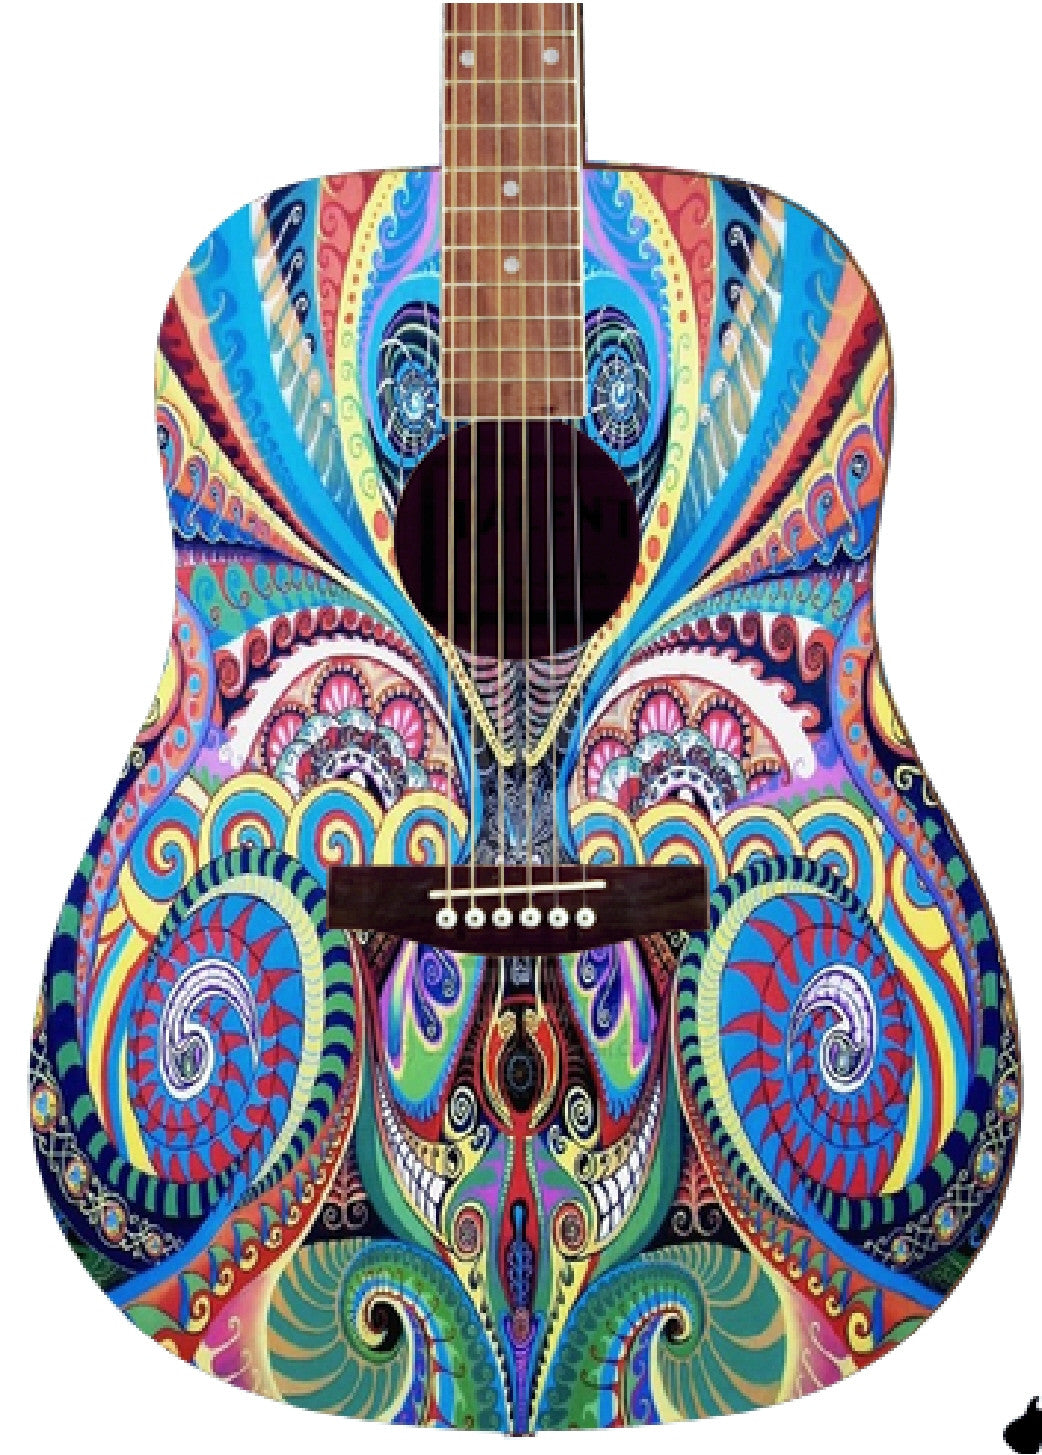 Custom Acoustic Guitar - Zion Graphic Collectibles